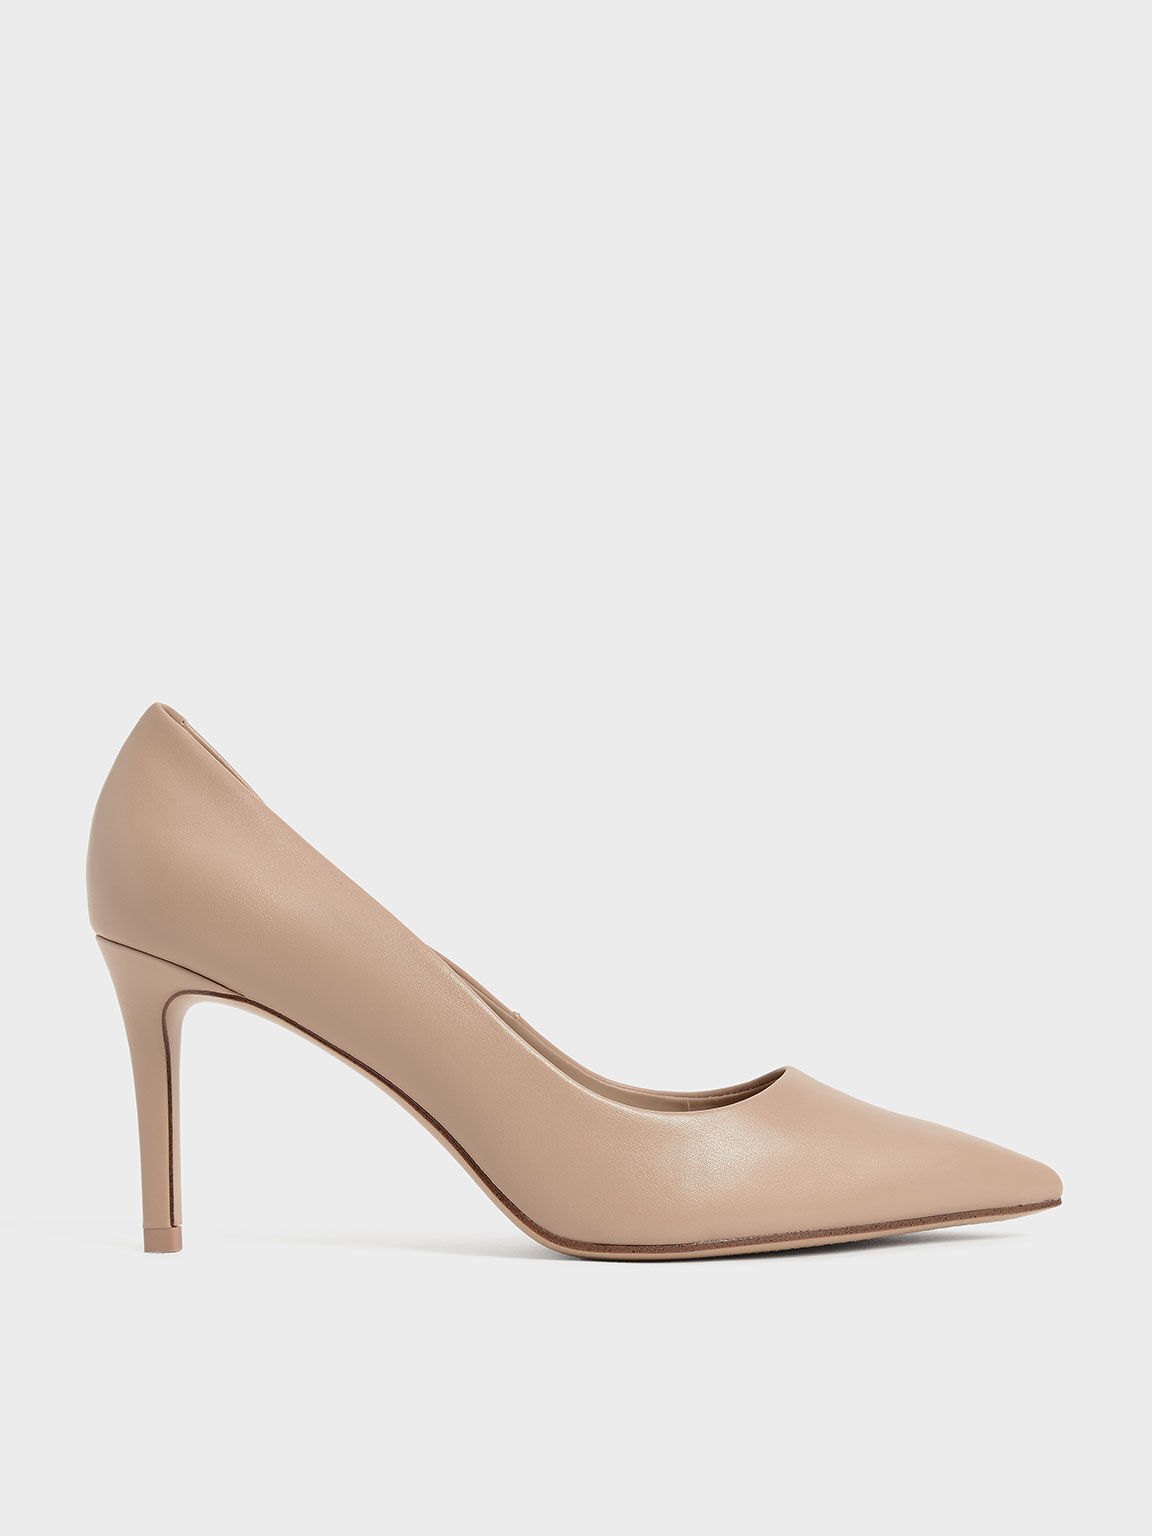 Dwelling afstand tro Nude Pointed Toe Stiletto Pumps - CHARLES & KEITH ID